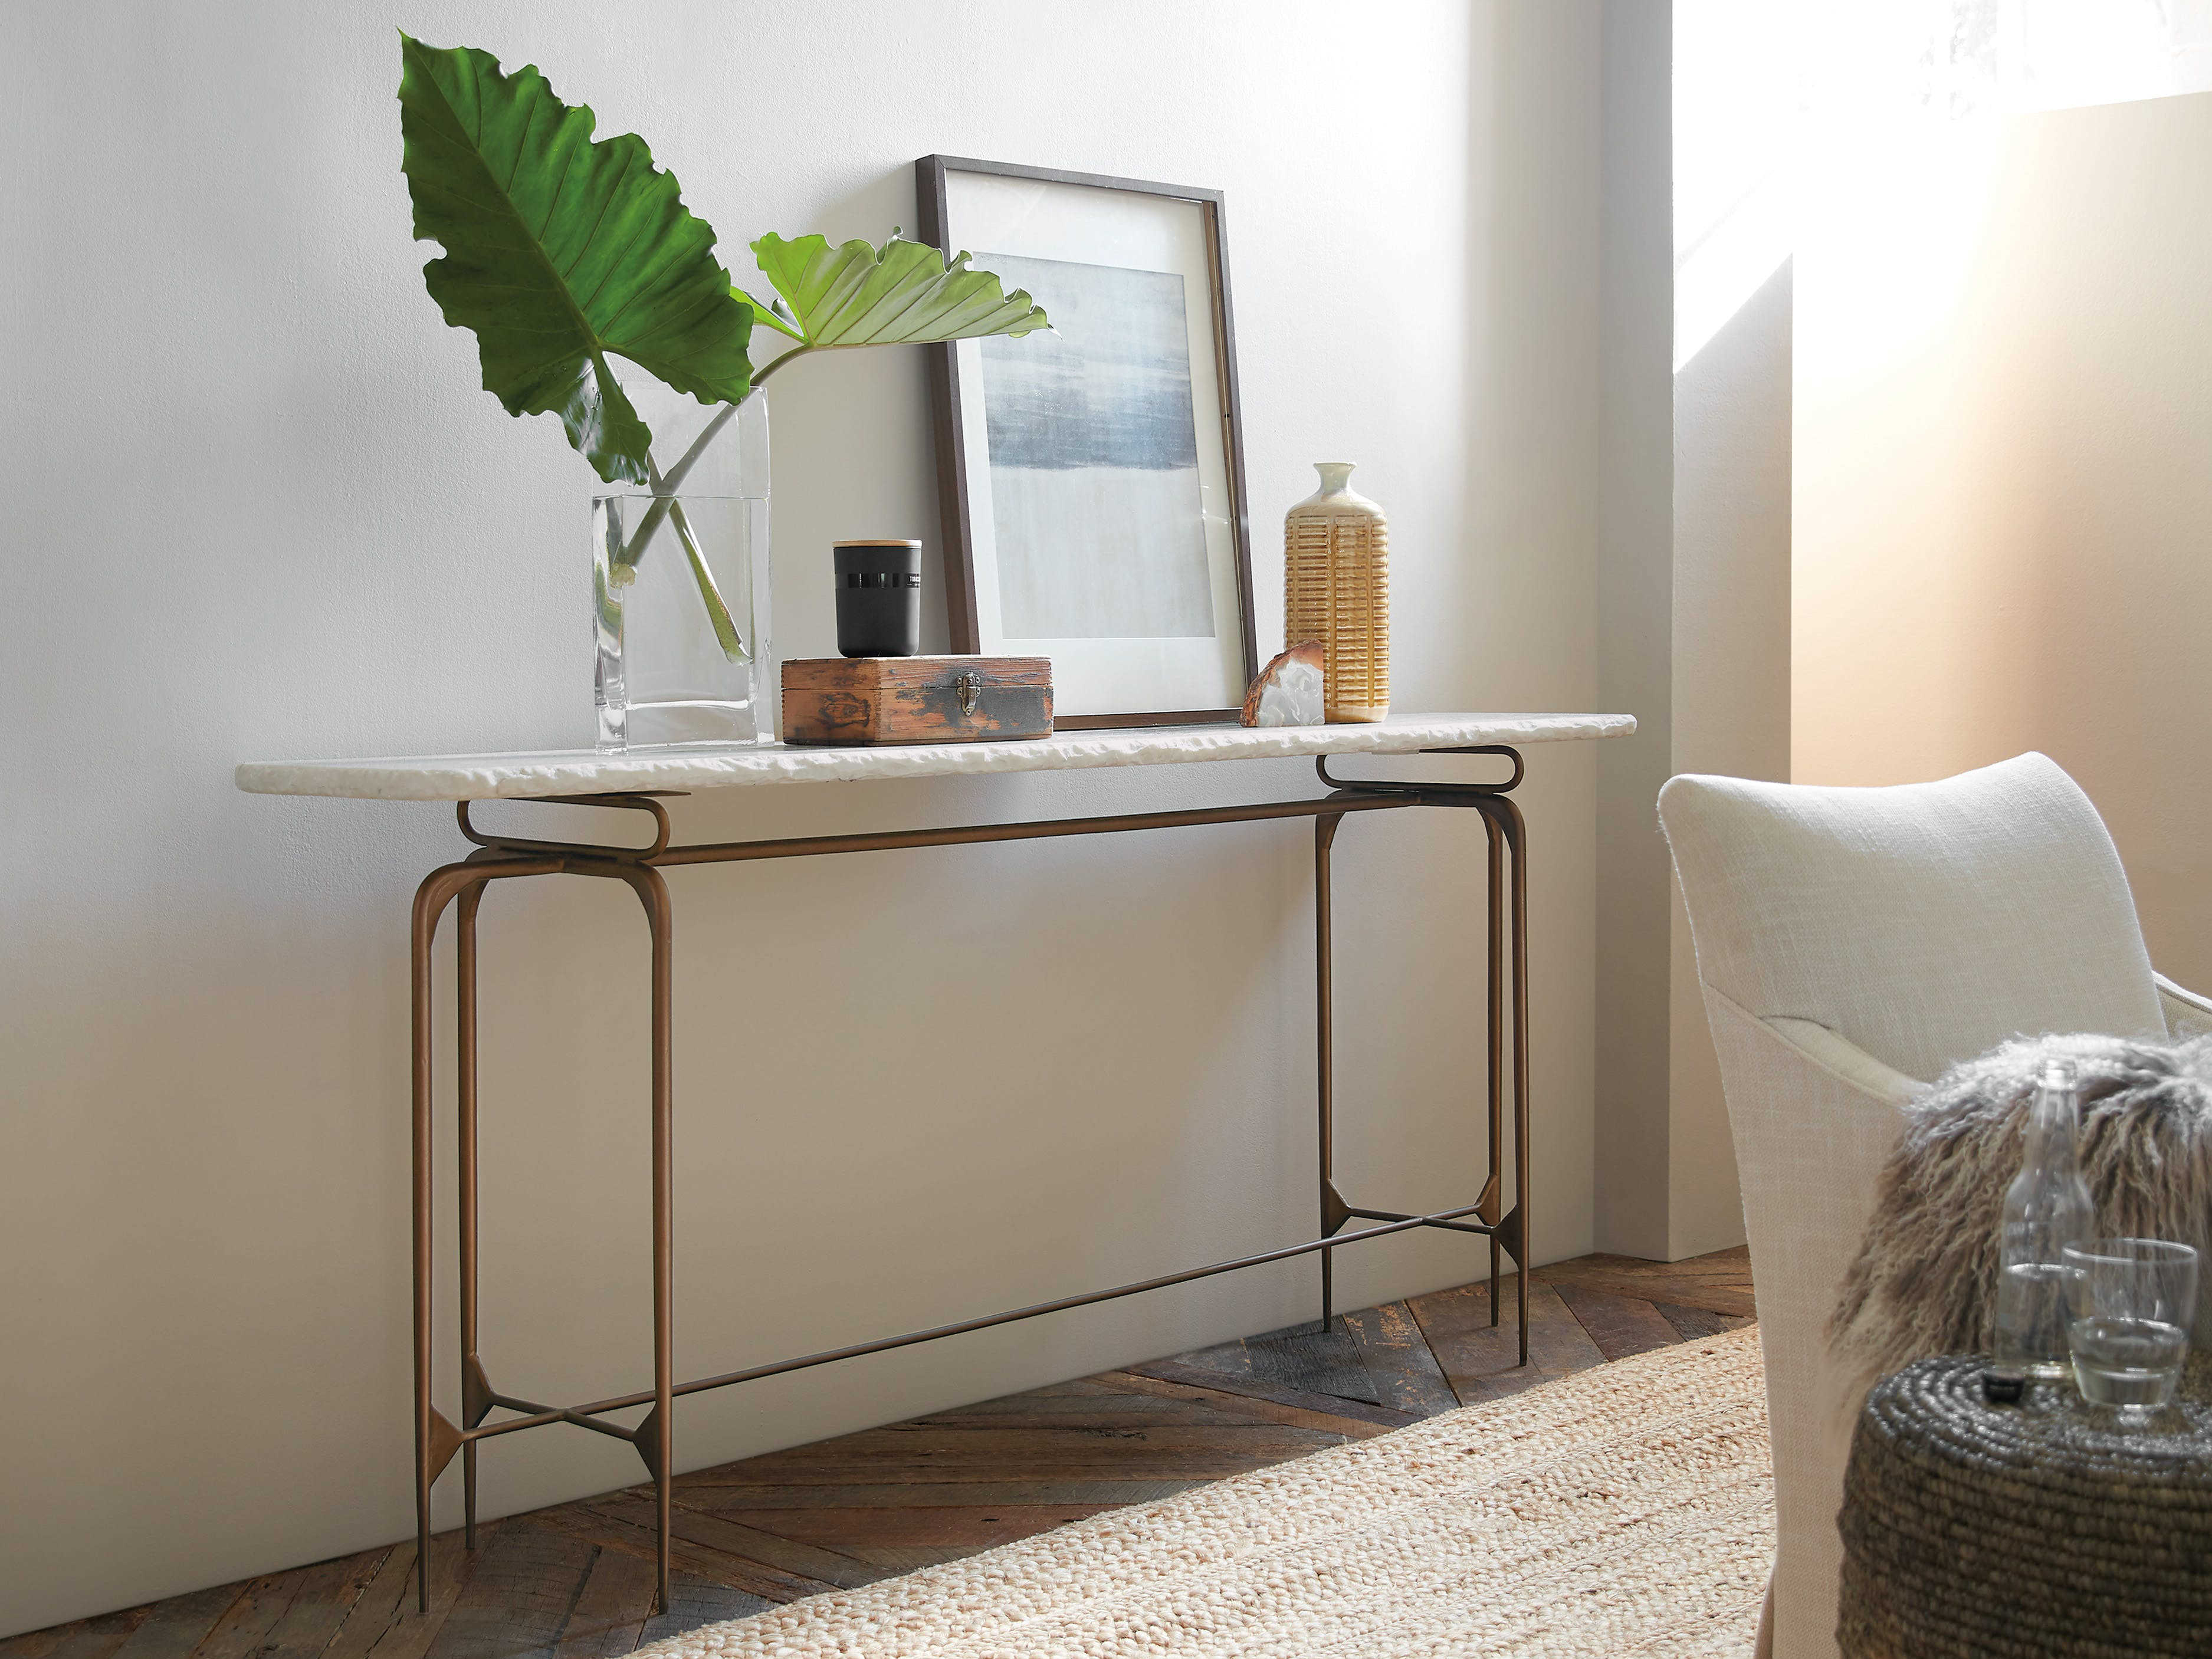 skinny console table or sideboard